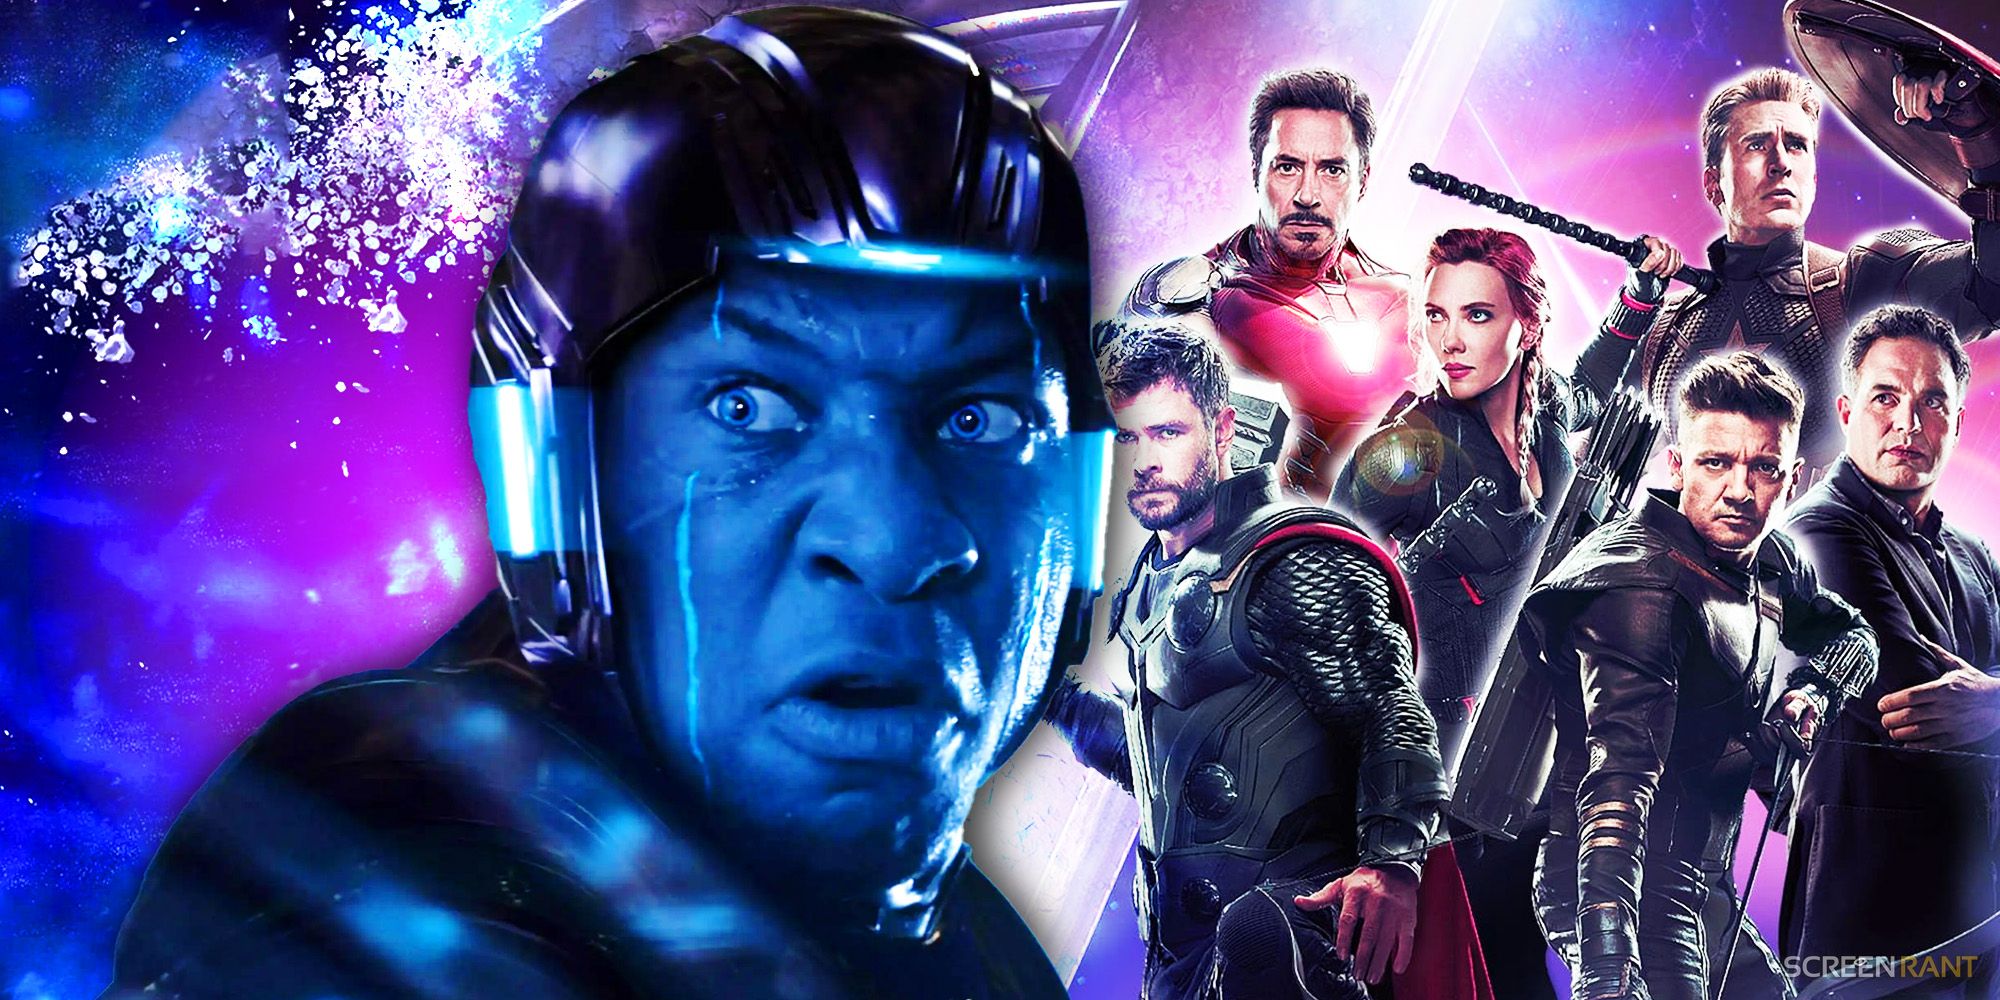 Custom image of Jonathan Majors' Kang the Conqueror with his blue visor looking concerned and the original Avengers from an Avengers: Endgame official poster